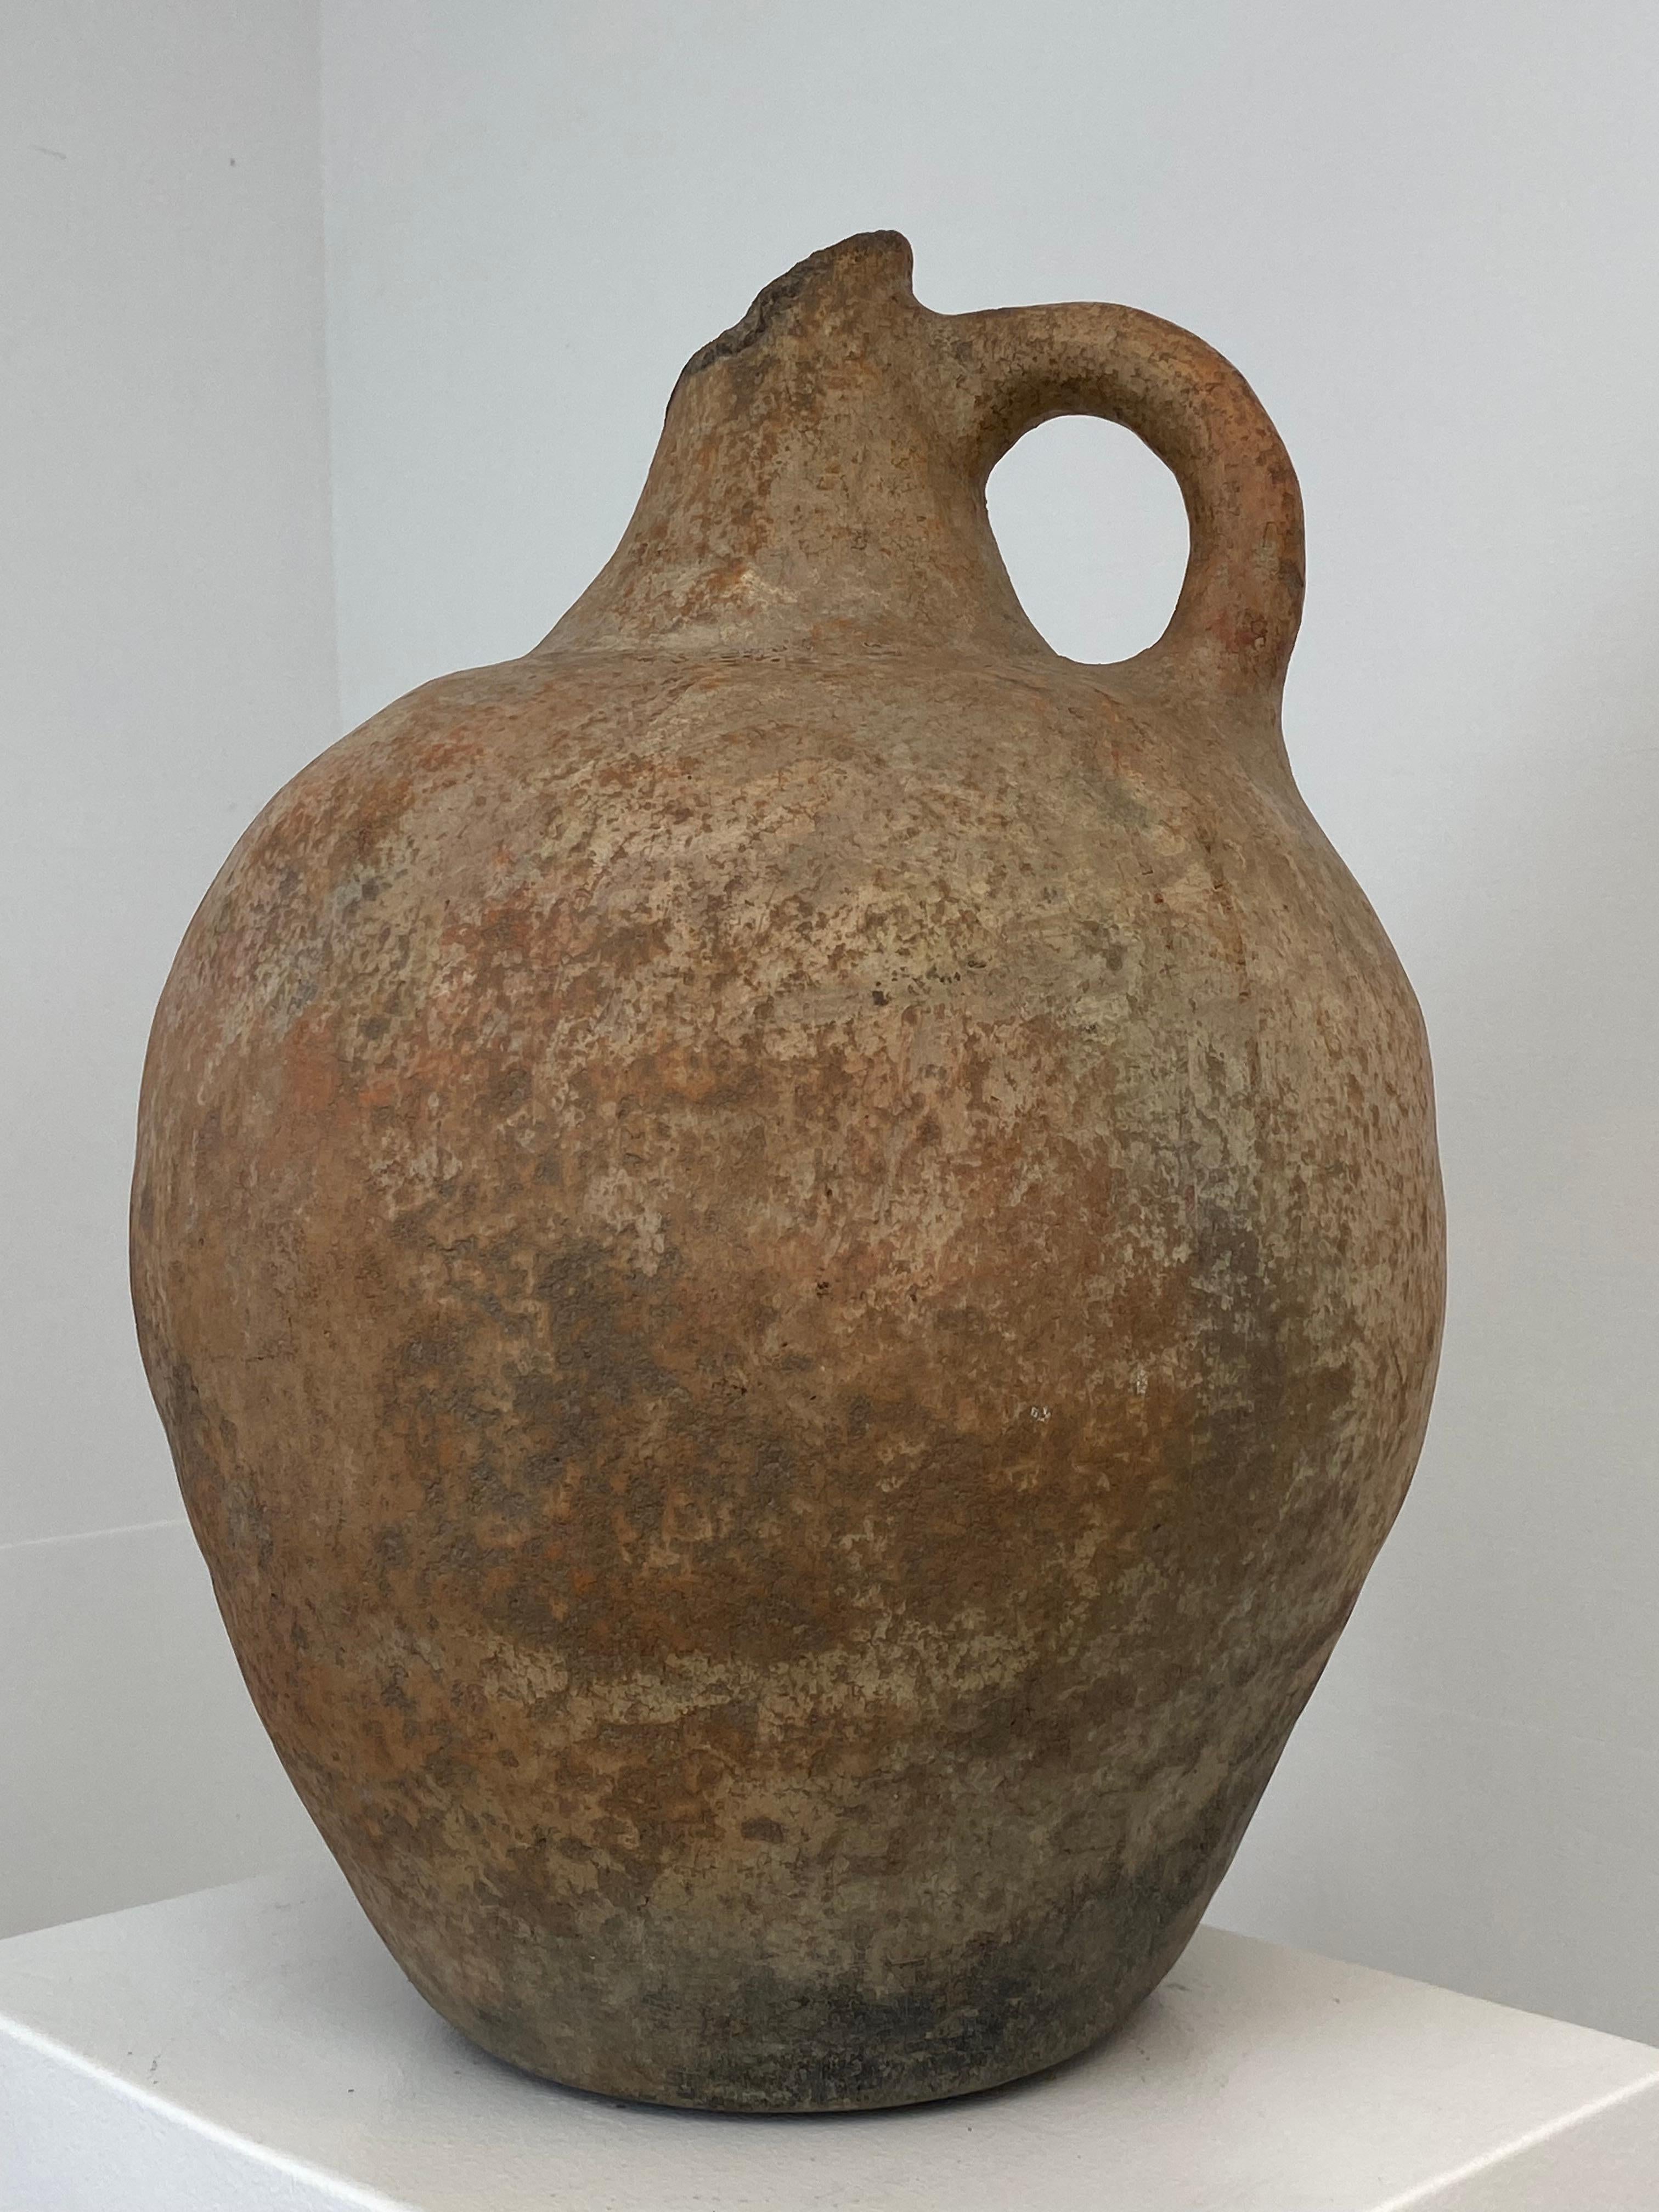 Antique Berber Terracotta Jar from Morocco In Excellent Condition For Sale In Schellebelle, BE